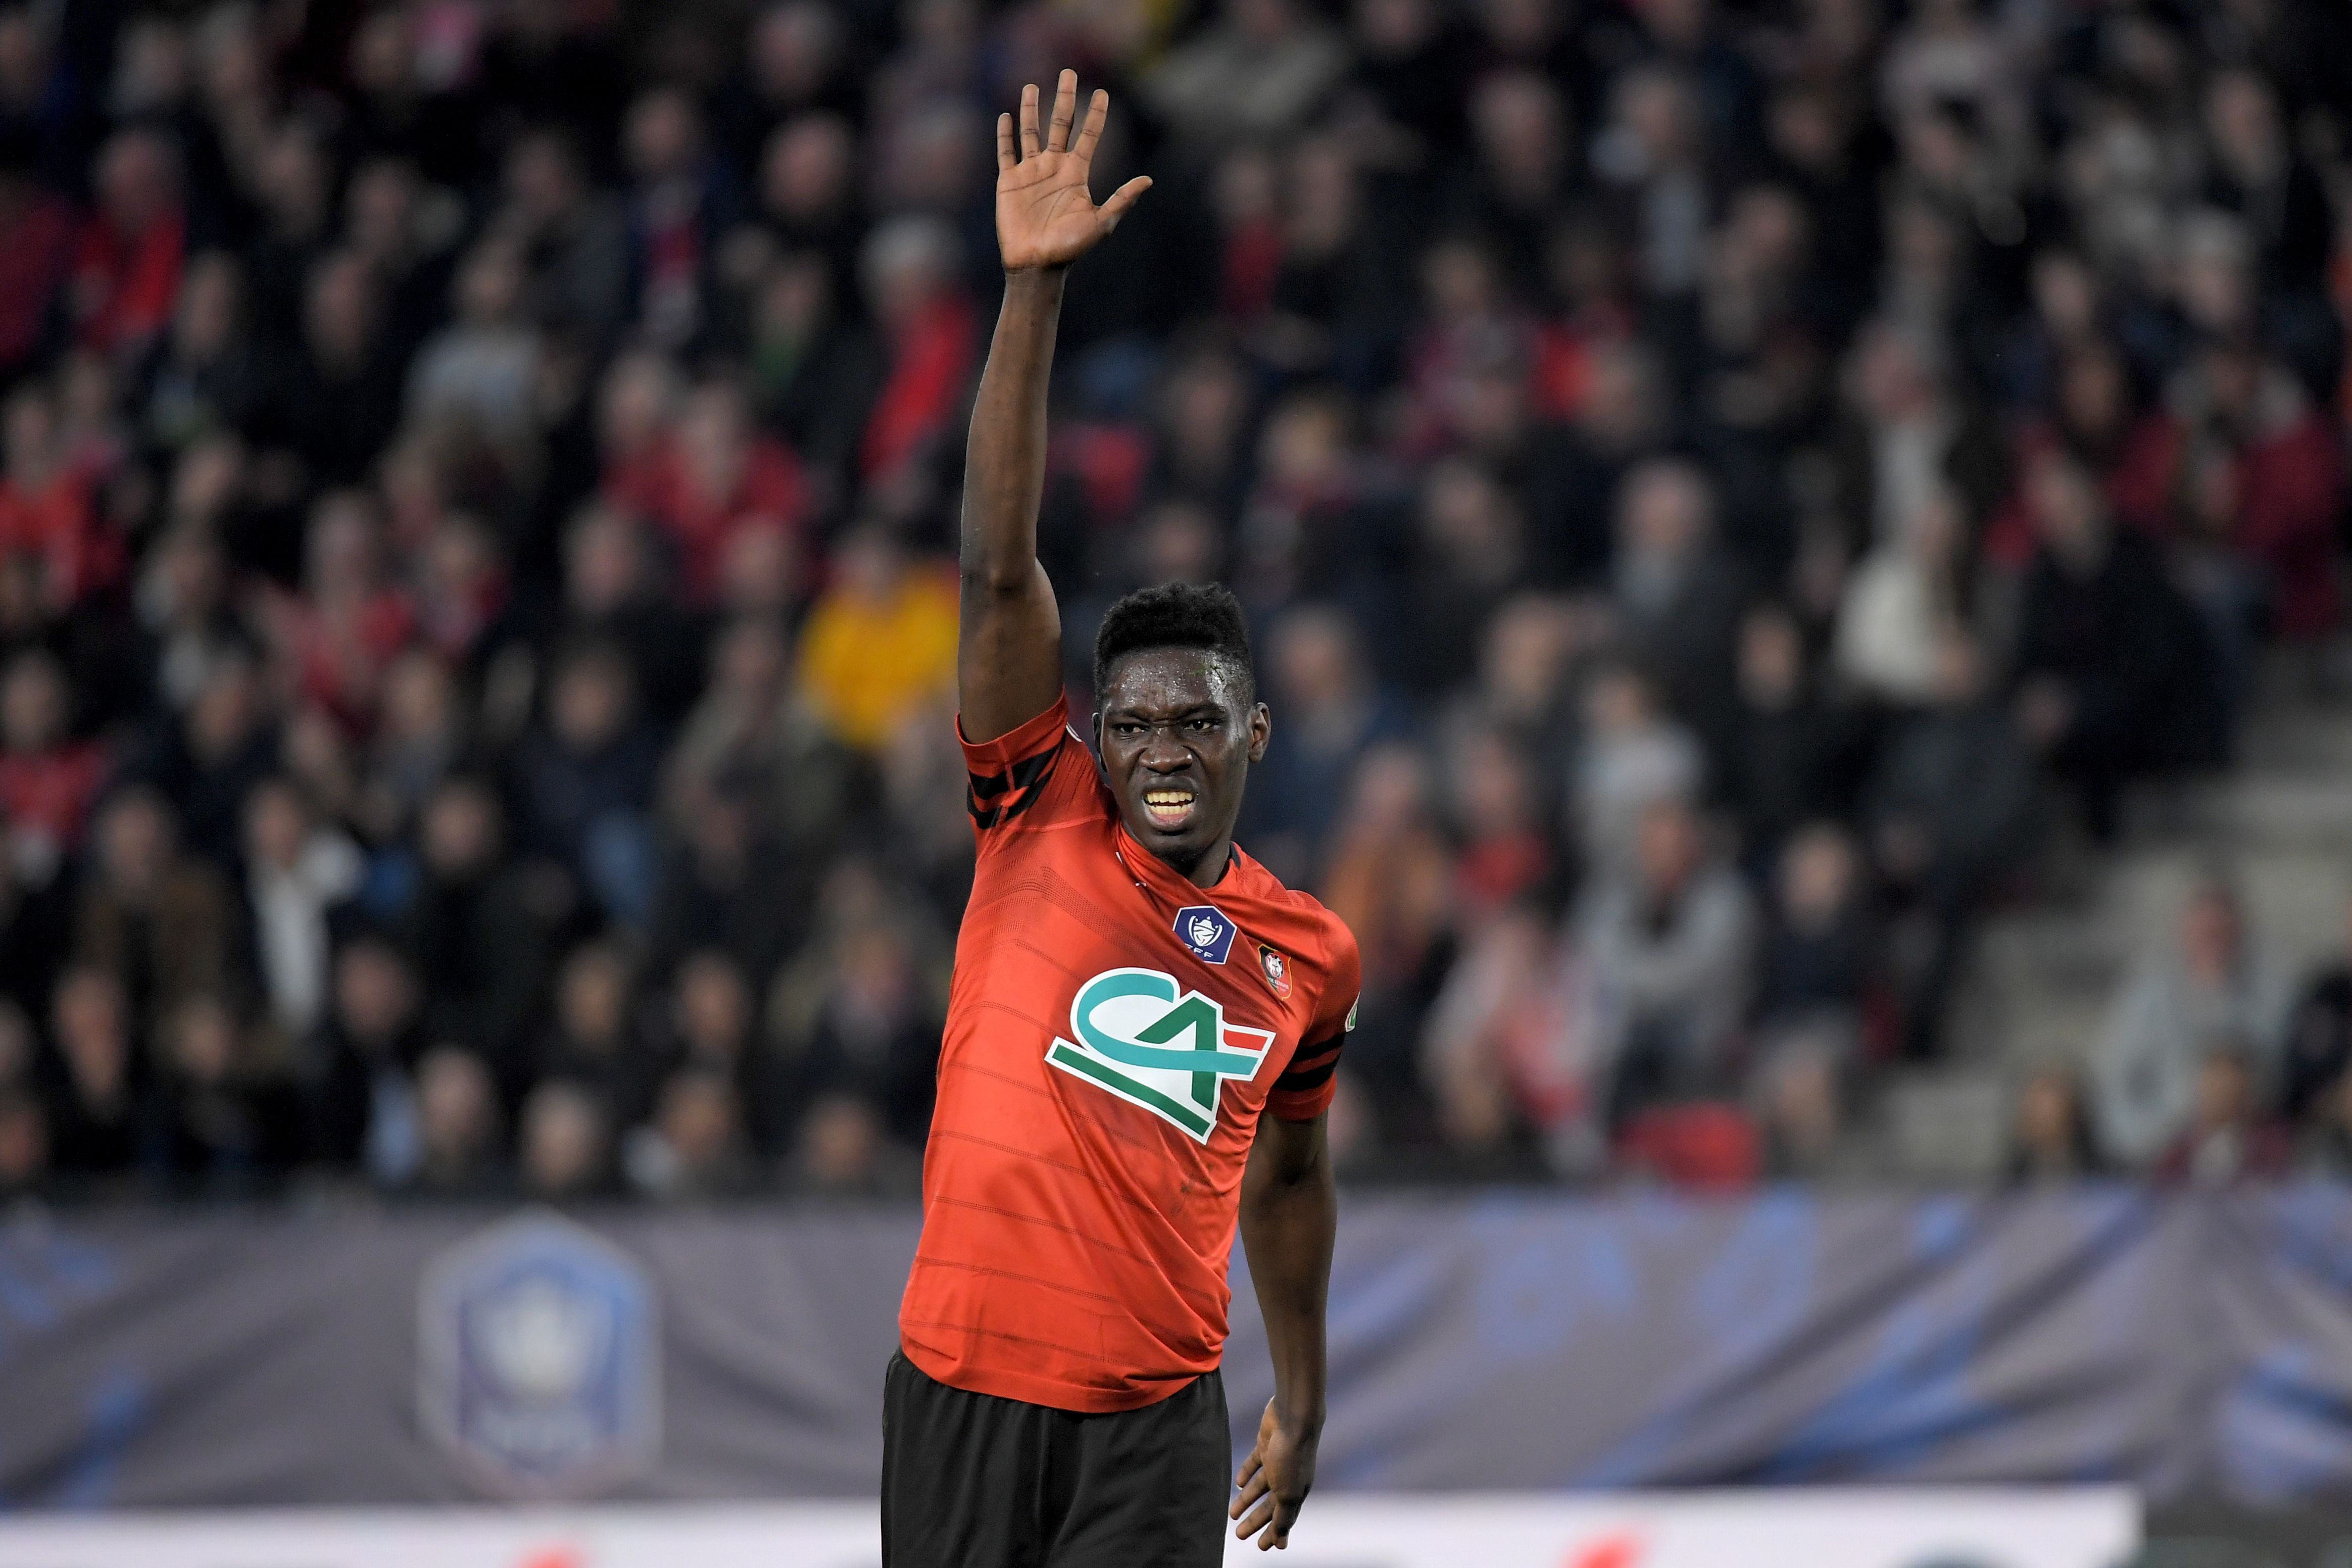 Rennes' Senegalese forward Ismaila Sarr gestures during the French Cup quarter-final football match between Stade Rennais FC and US Orleans Loiret Football at the Roazhon Park stadium in Rennes, northwestern France on February 27, 2019. (Photo by LOIC VENANCE / AFP)        (Photo credit should read LOIC VENANCE/AFP/Getty Images)